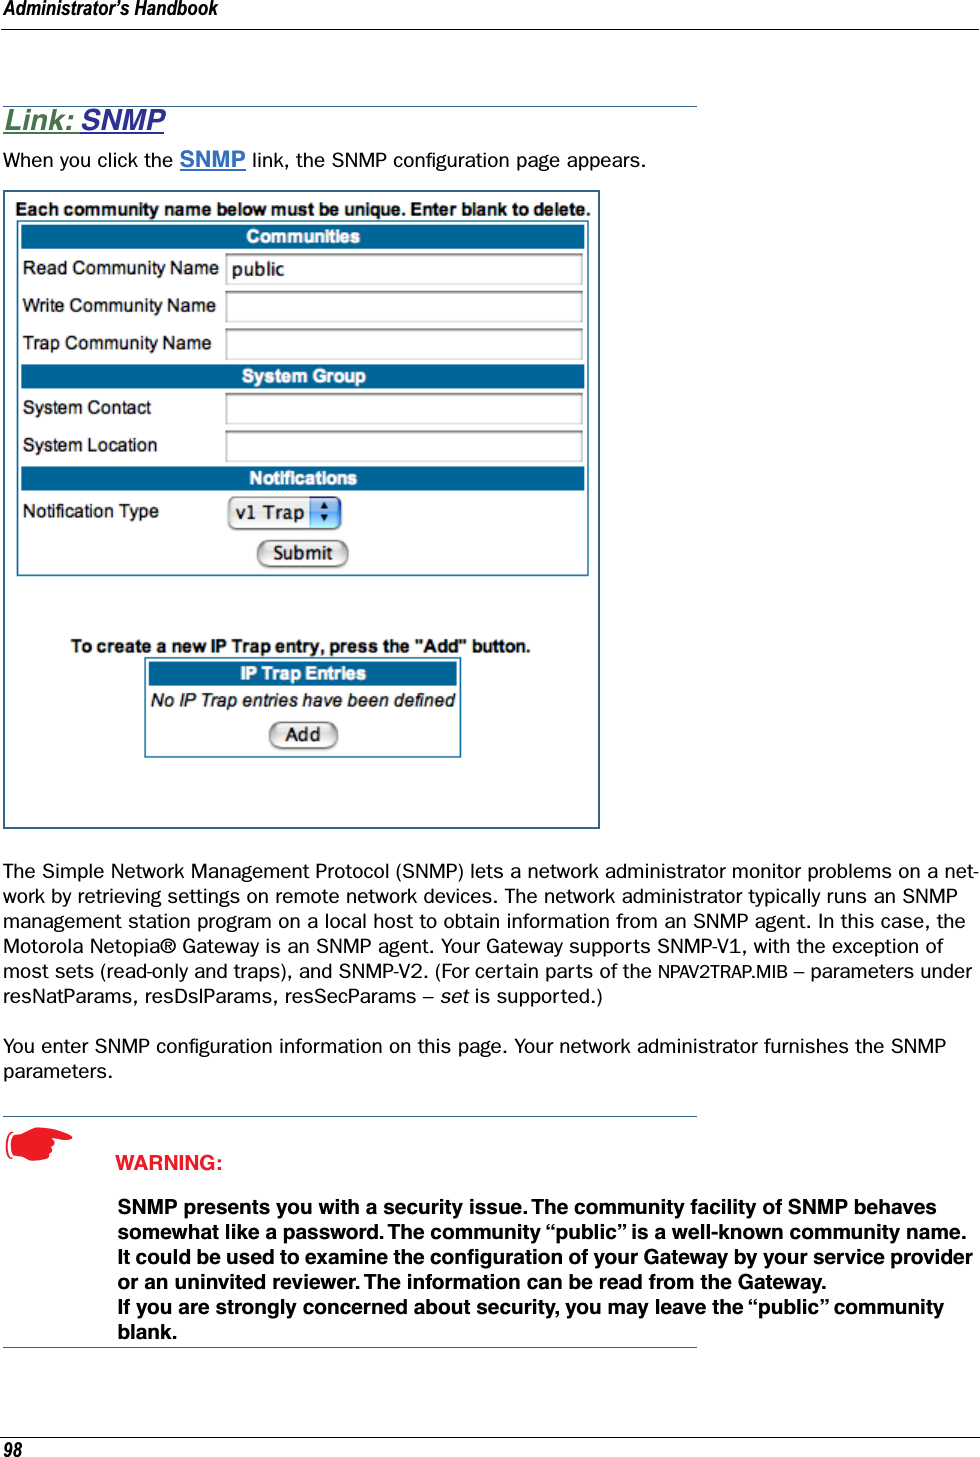 Administrator’s Handbook98Link: SNMPWhen you click the SNMP link, the SNMP conﬁguration page appears.The Simple Network Management Protocol (SNMP) lets a network administrator monitor problems on a net-work by retrieving settings on remote network devices. The network administrator typically runs an SNMP management station program on a local host to obtain information from an SNMP agent. In this case, the Motorola Netopia® Gateway is an SNMP agent. Your Gateway supports SNMP-V1, with the exception of most sets (read-only and traps), and SNMP-V2. (For certain parts of the NPAV2TRAP.MIB – parameters under resNatParams, resDslParams, resSecParams – set is supported.)You enter SNMP conﬁguration information on this page. Your network administrator furnishes the SNMP parameters.☛  WARNING:SNMP presents you with a security issue. The community facility of SNMP behaves somewhat like a password. The community “public” is a well-known community name. It could be used to examine the conﬁguration of your Gateway by your service provider or an uninvited reviewer. The information can be read from the Gateway. If you are strongly concerned about security, you may leave the “public” community blank.